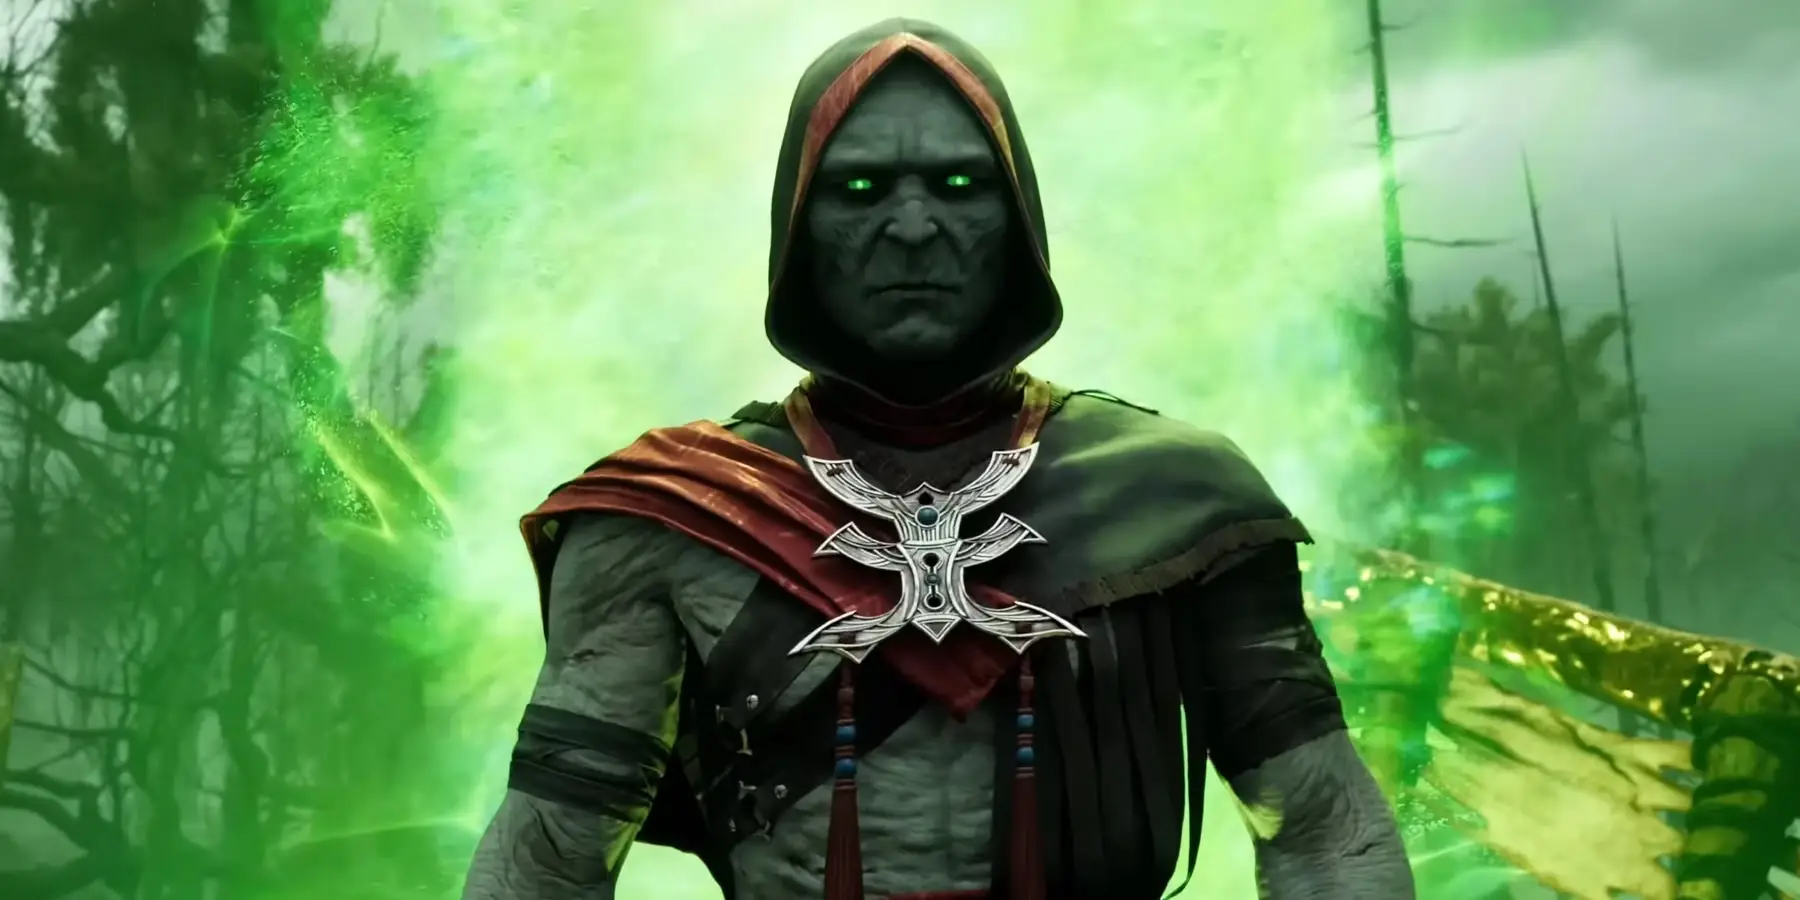 Ermac Joins Mortal Kombat 1: What Players Can Expect